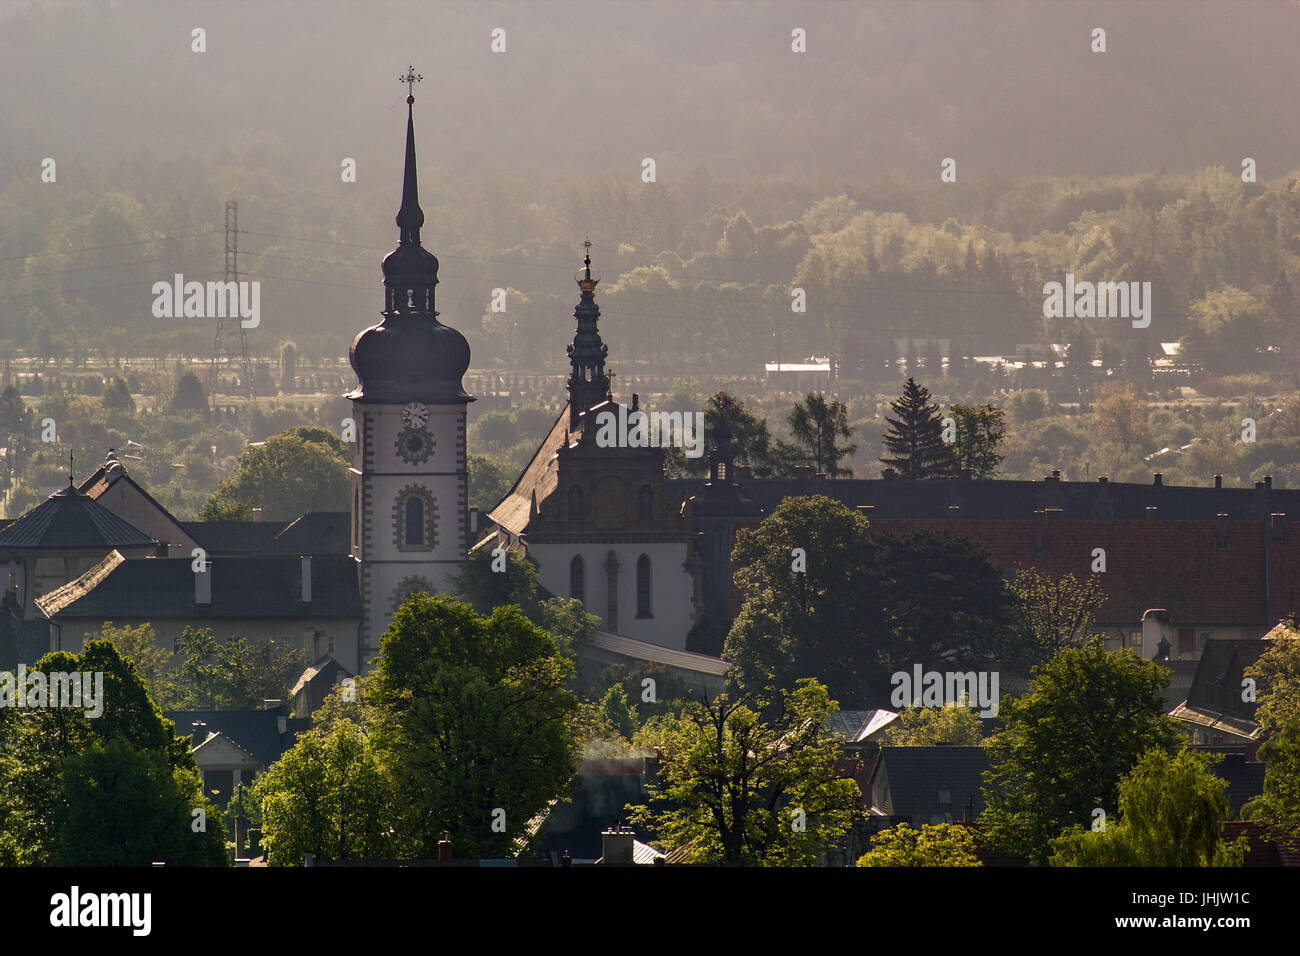 Stary Sacz town at sunrise. Monastery of the Poor Clares in the Stary Sacz, Poland. Stock Photo